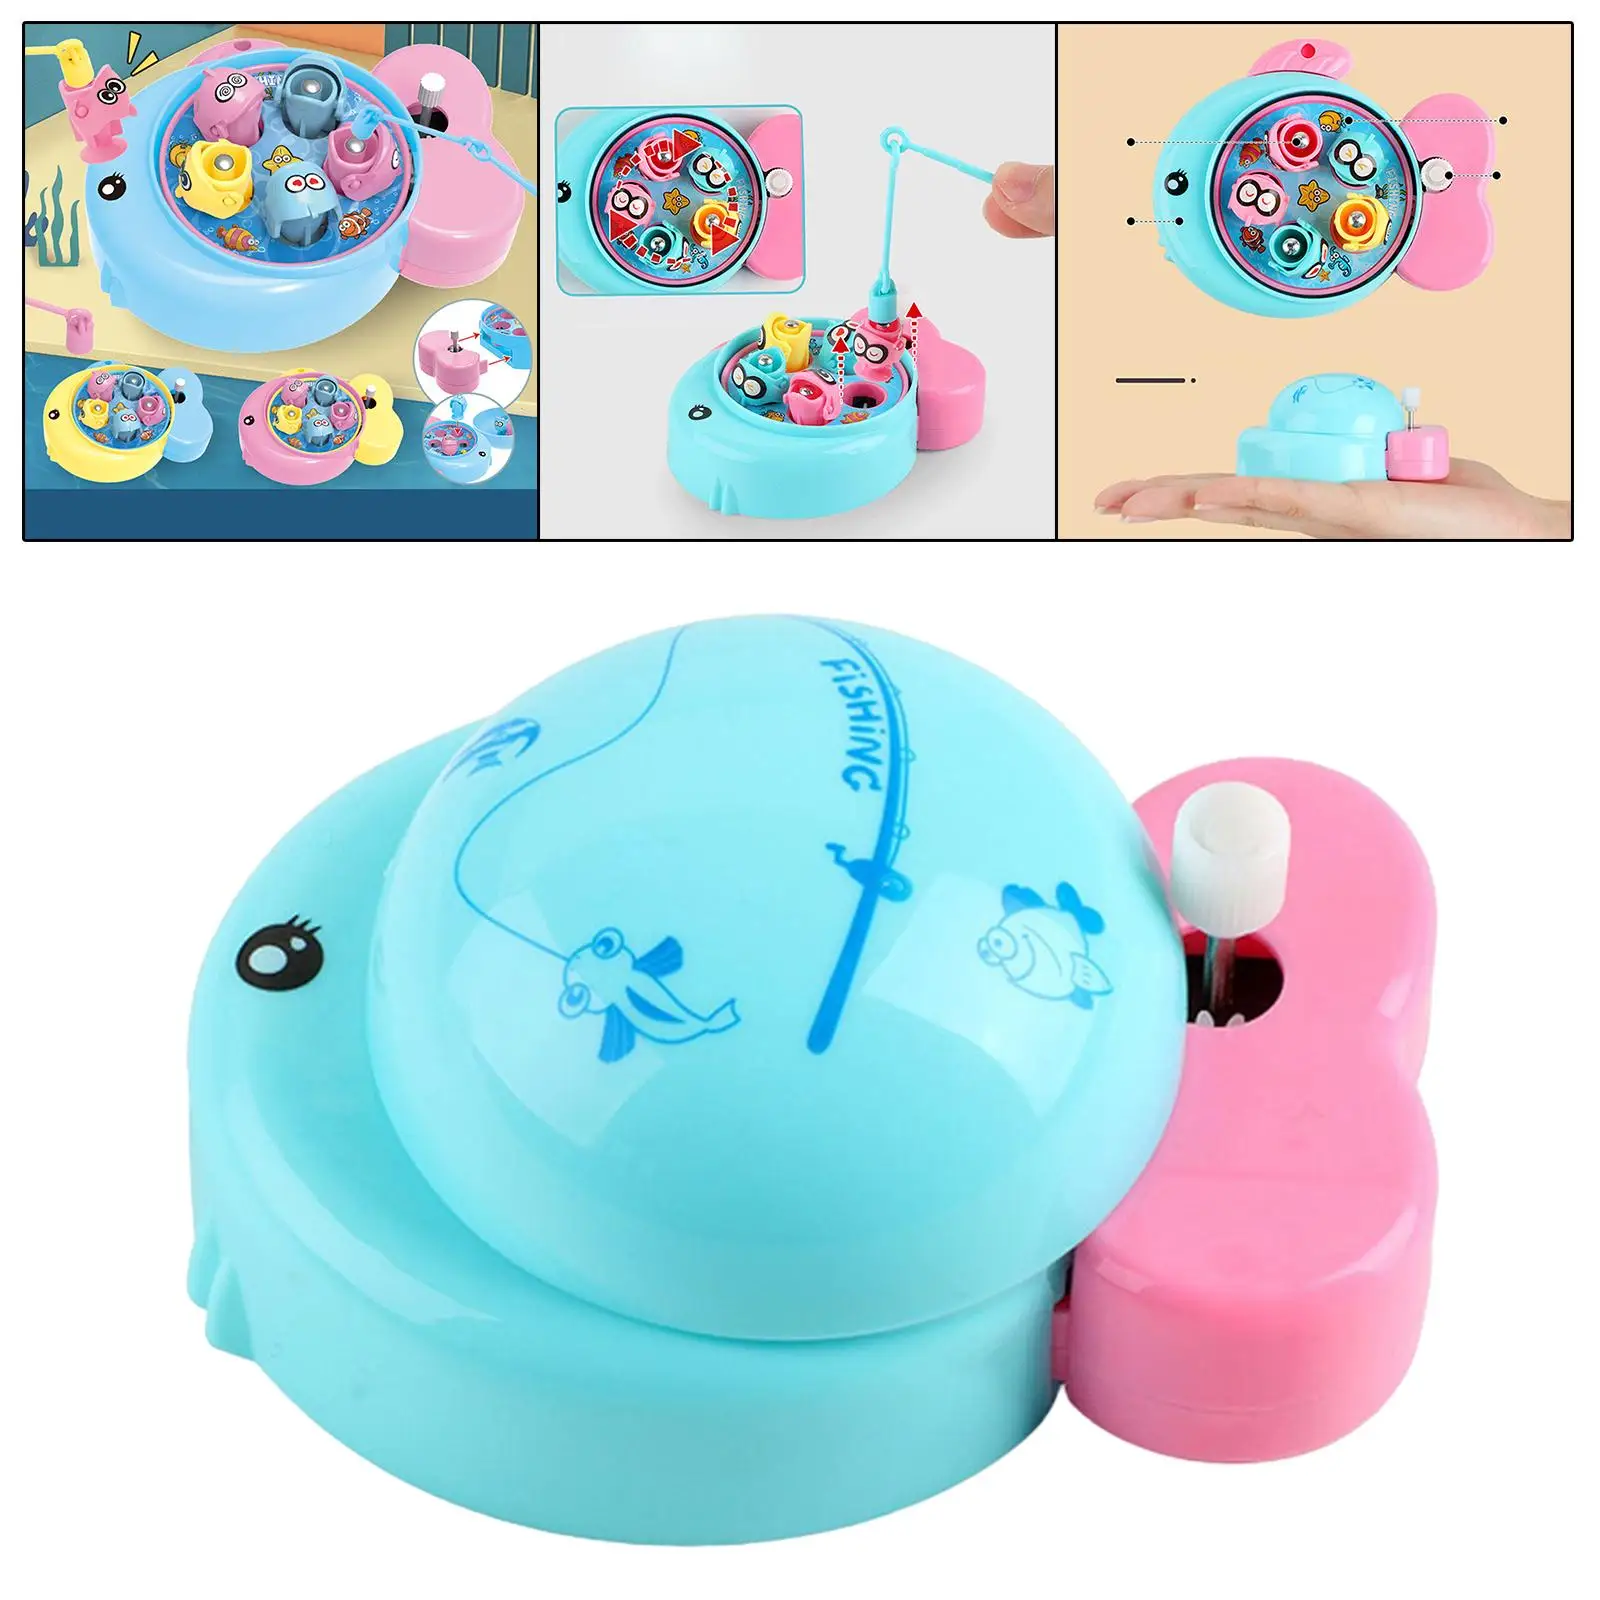 Montessori Fishing Toy Motor Skills Clock Toy for Ages 3+ Kids Children Holiday Gifts